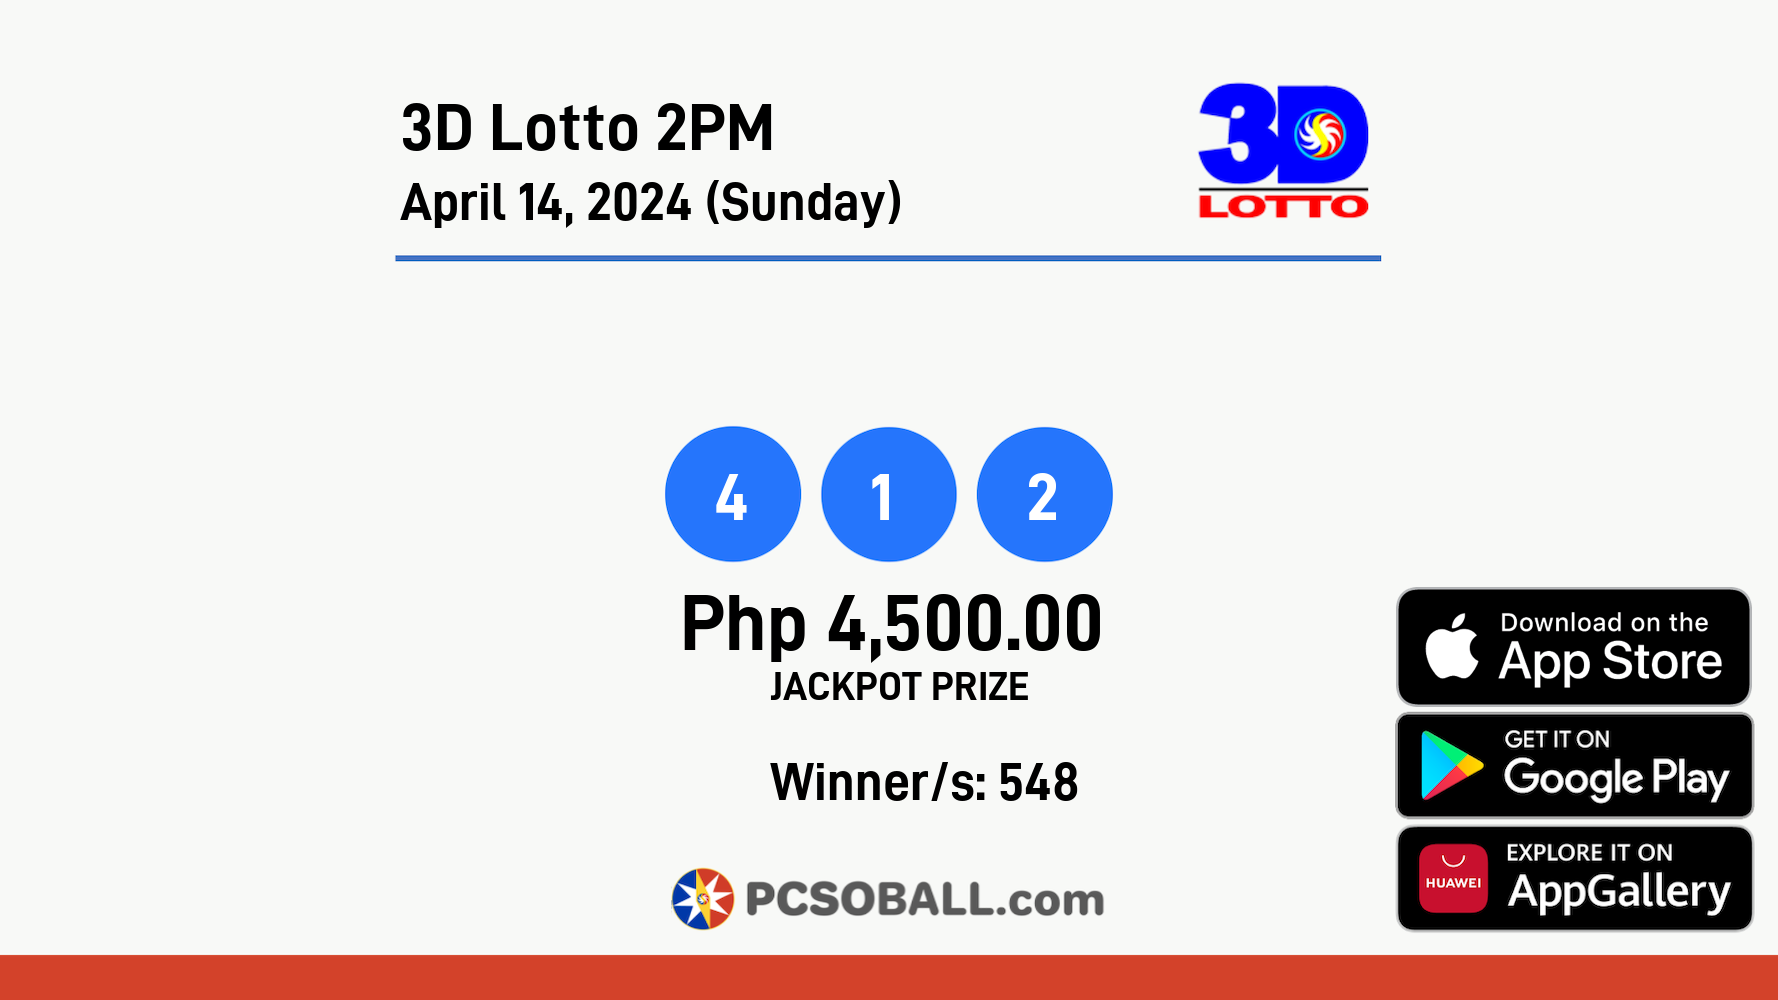 3D Lotto 2PM April 14, 2024 (Sunday) Result